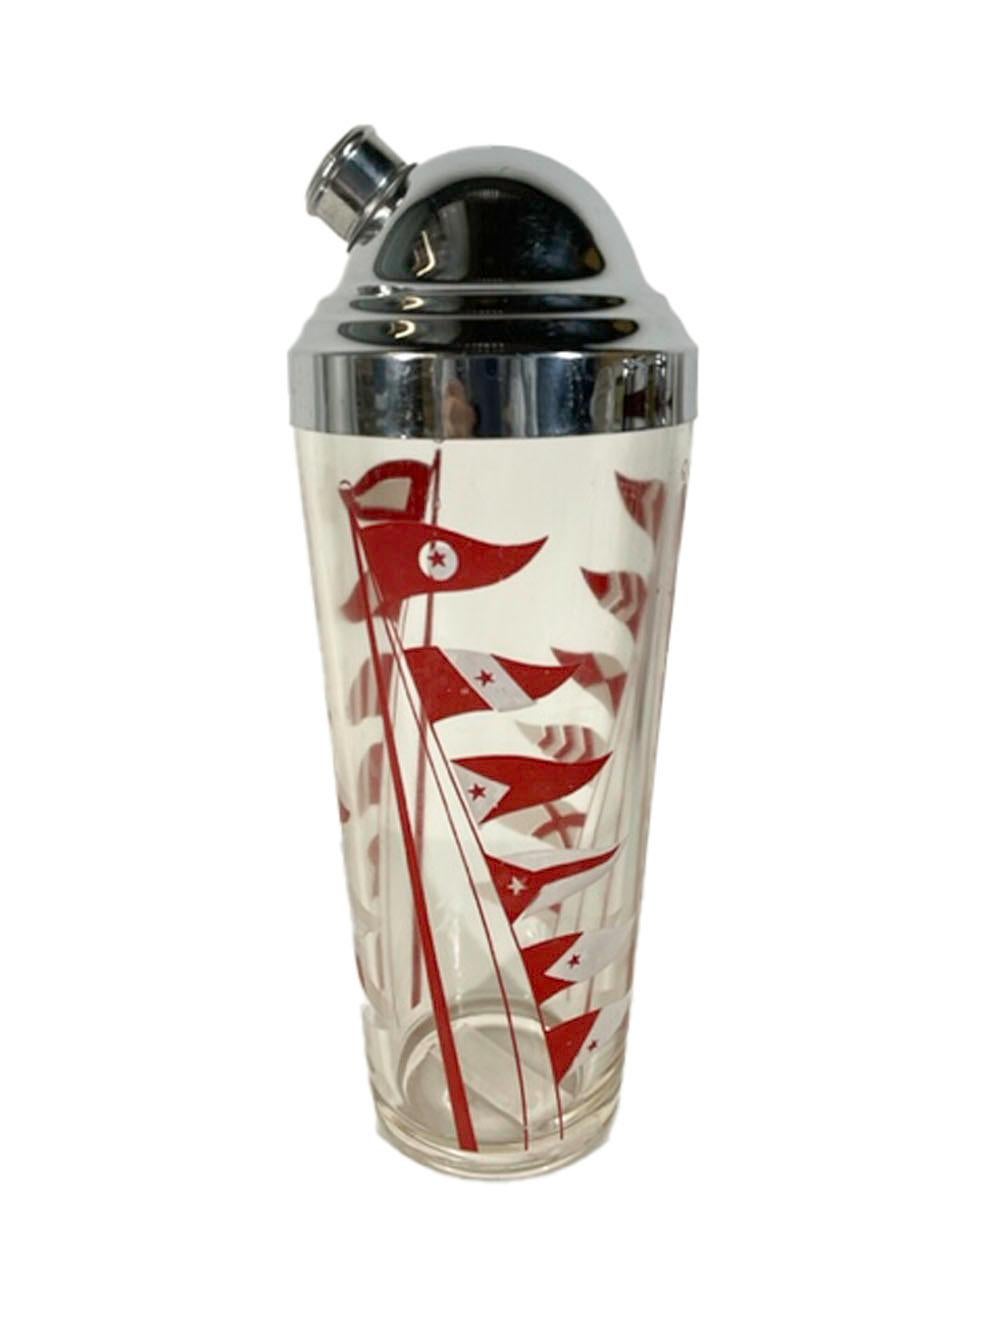 Hazel-Atlas, Art Deco cocktail shaker with a domed chrome lid, decorated with nautical signal flags in red and white enamel.